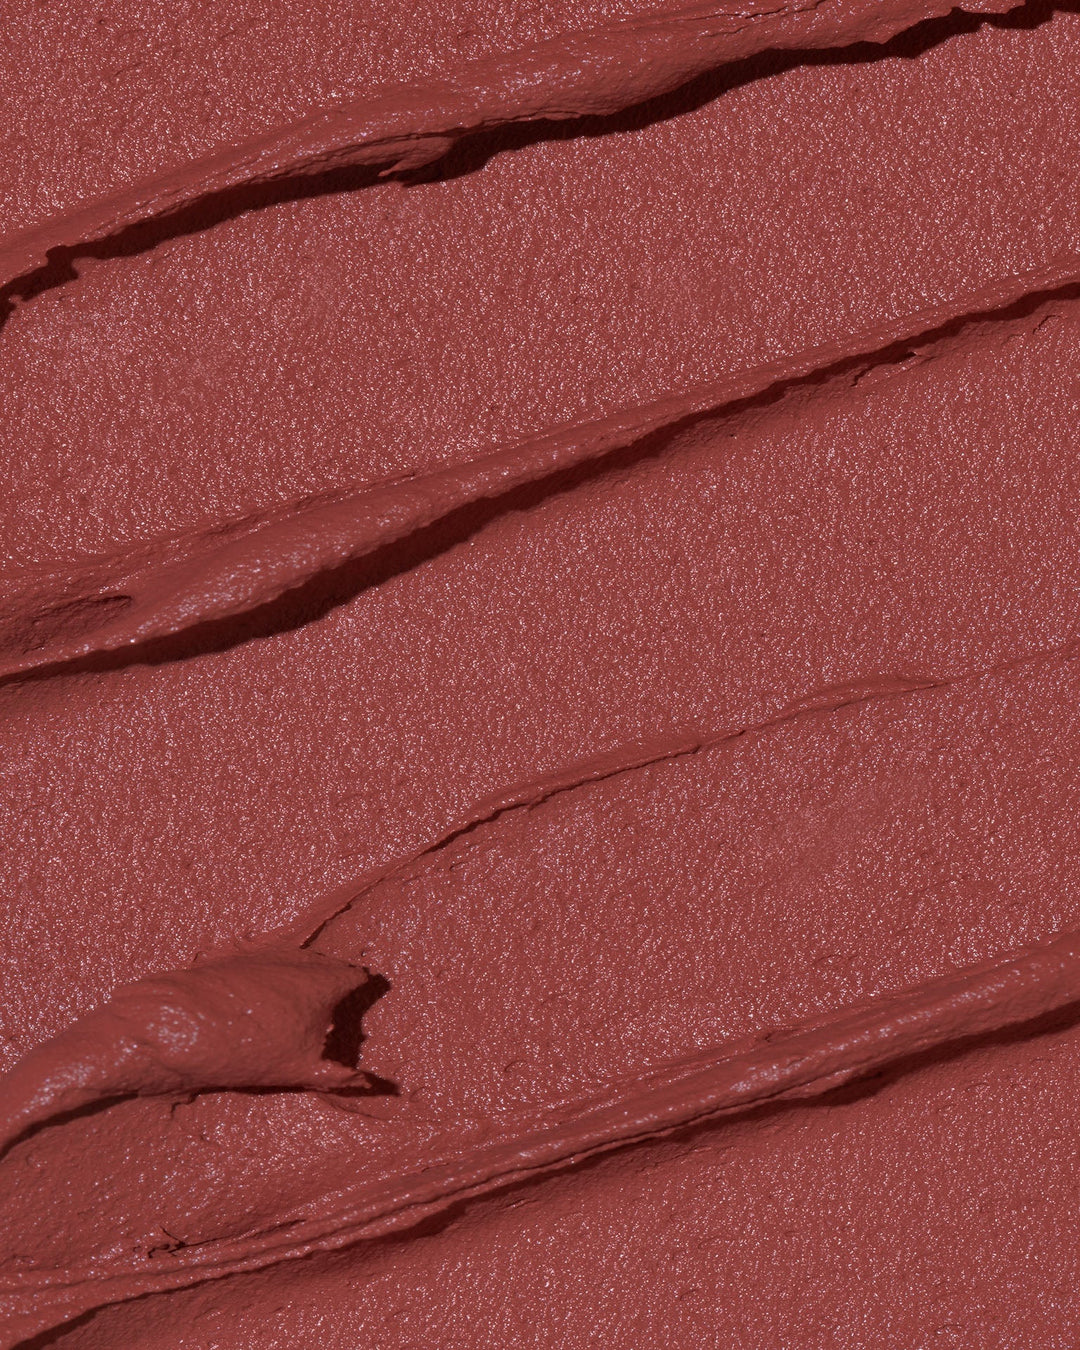 This is a swatch of the Peaking Velvet Mousse Lipstick. The color is like a mix of red/ brown/ and pink